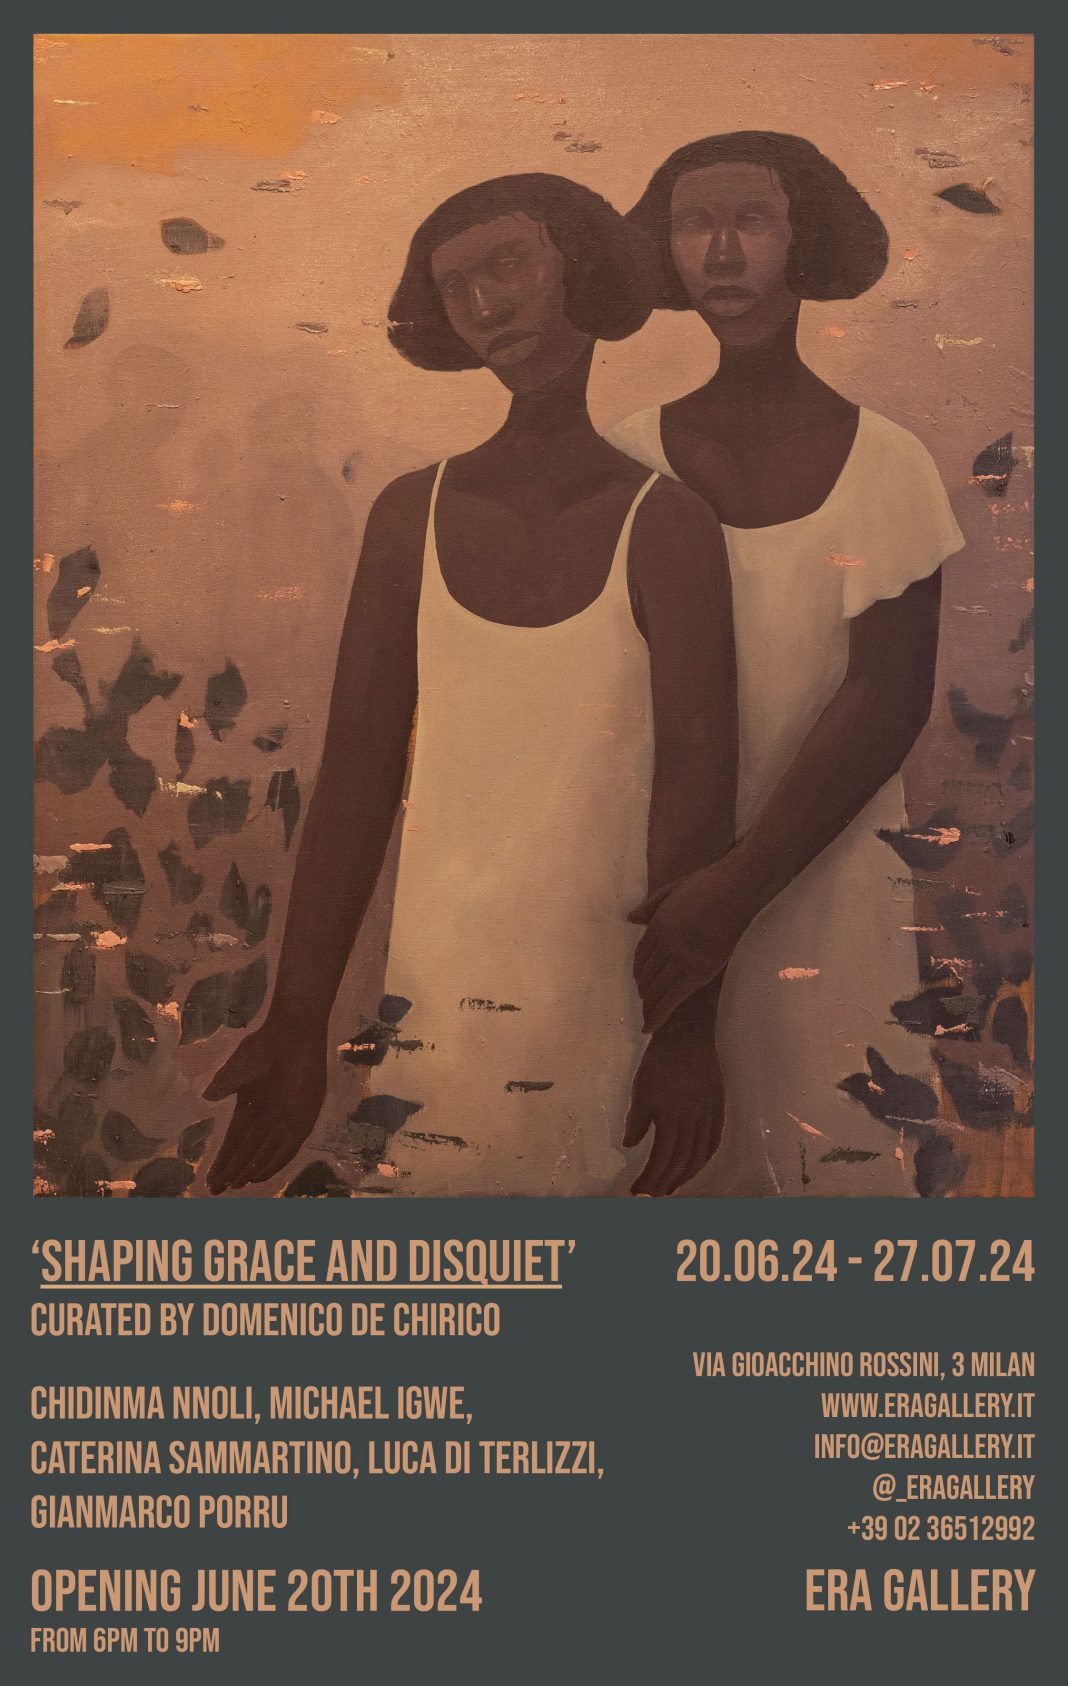 SHAPING GRACE AND DISQUIEThttps://www.exibart.com/repository/media/formidable/11/img/925/invito-ERA_def_low-1068x1686.jpg